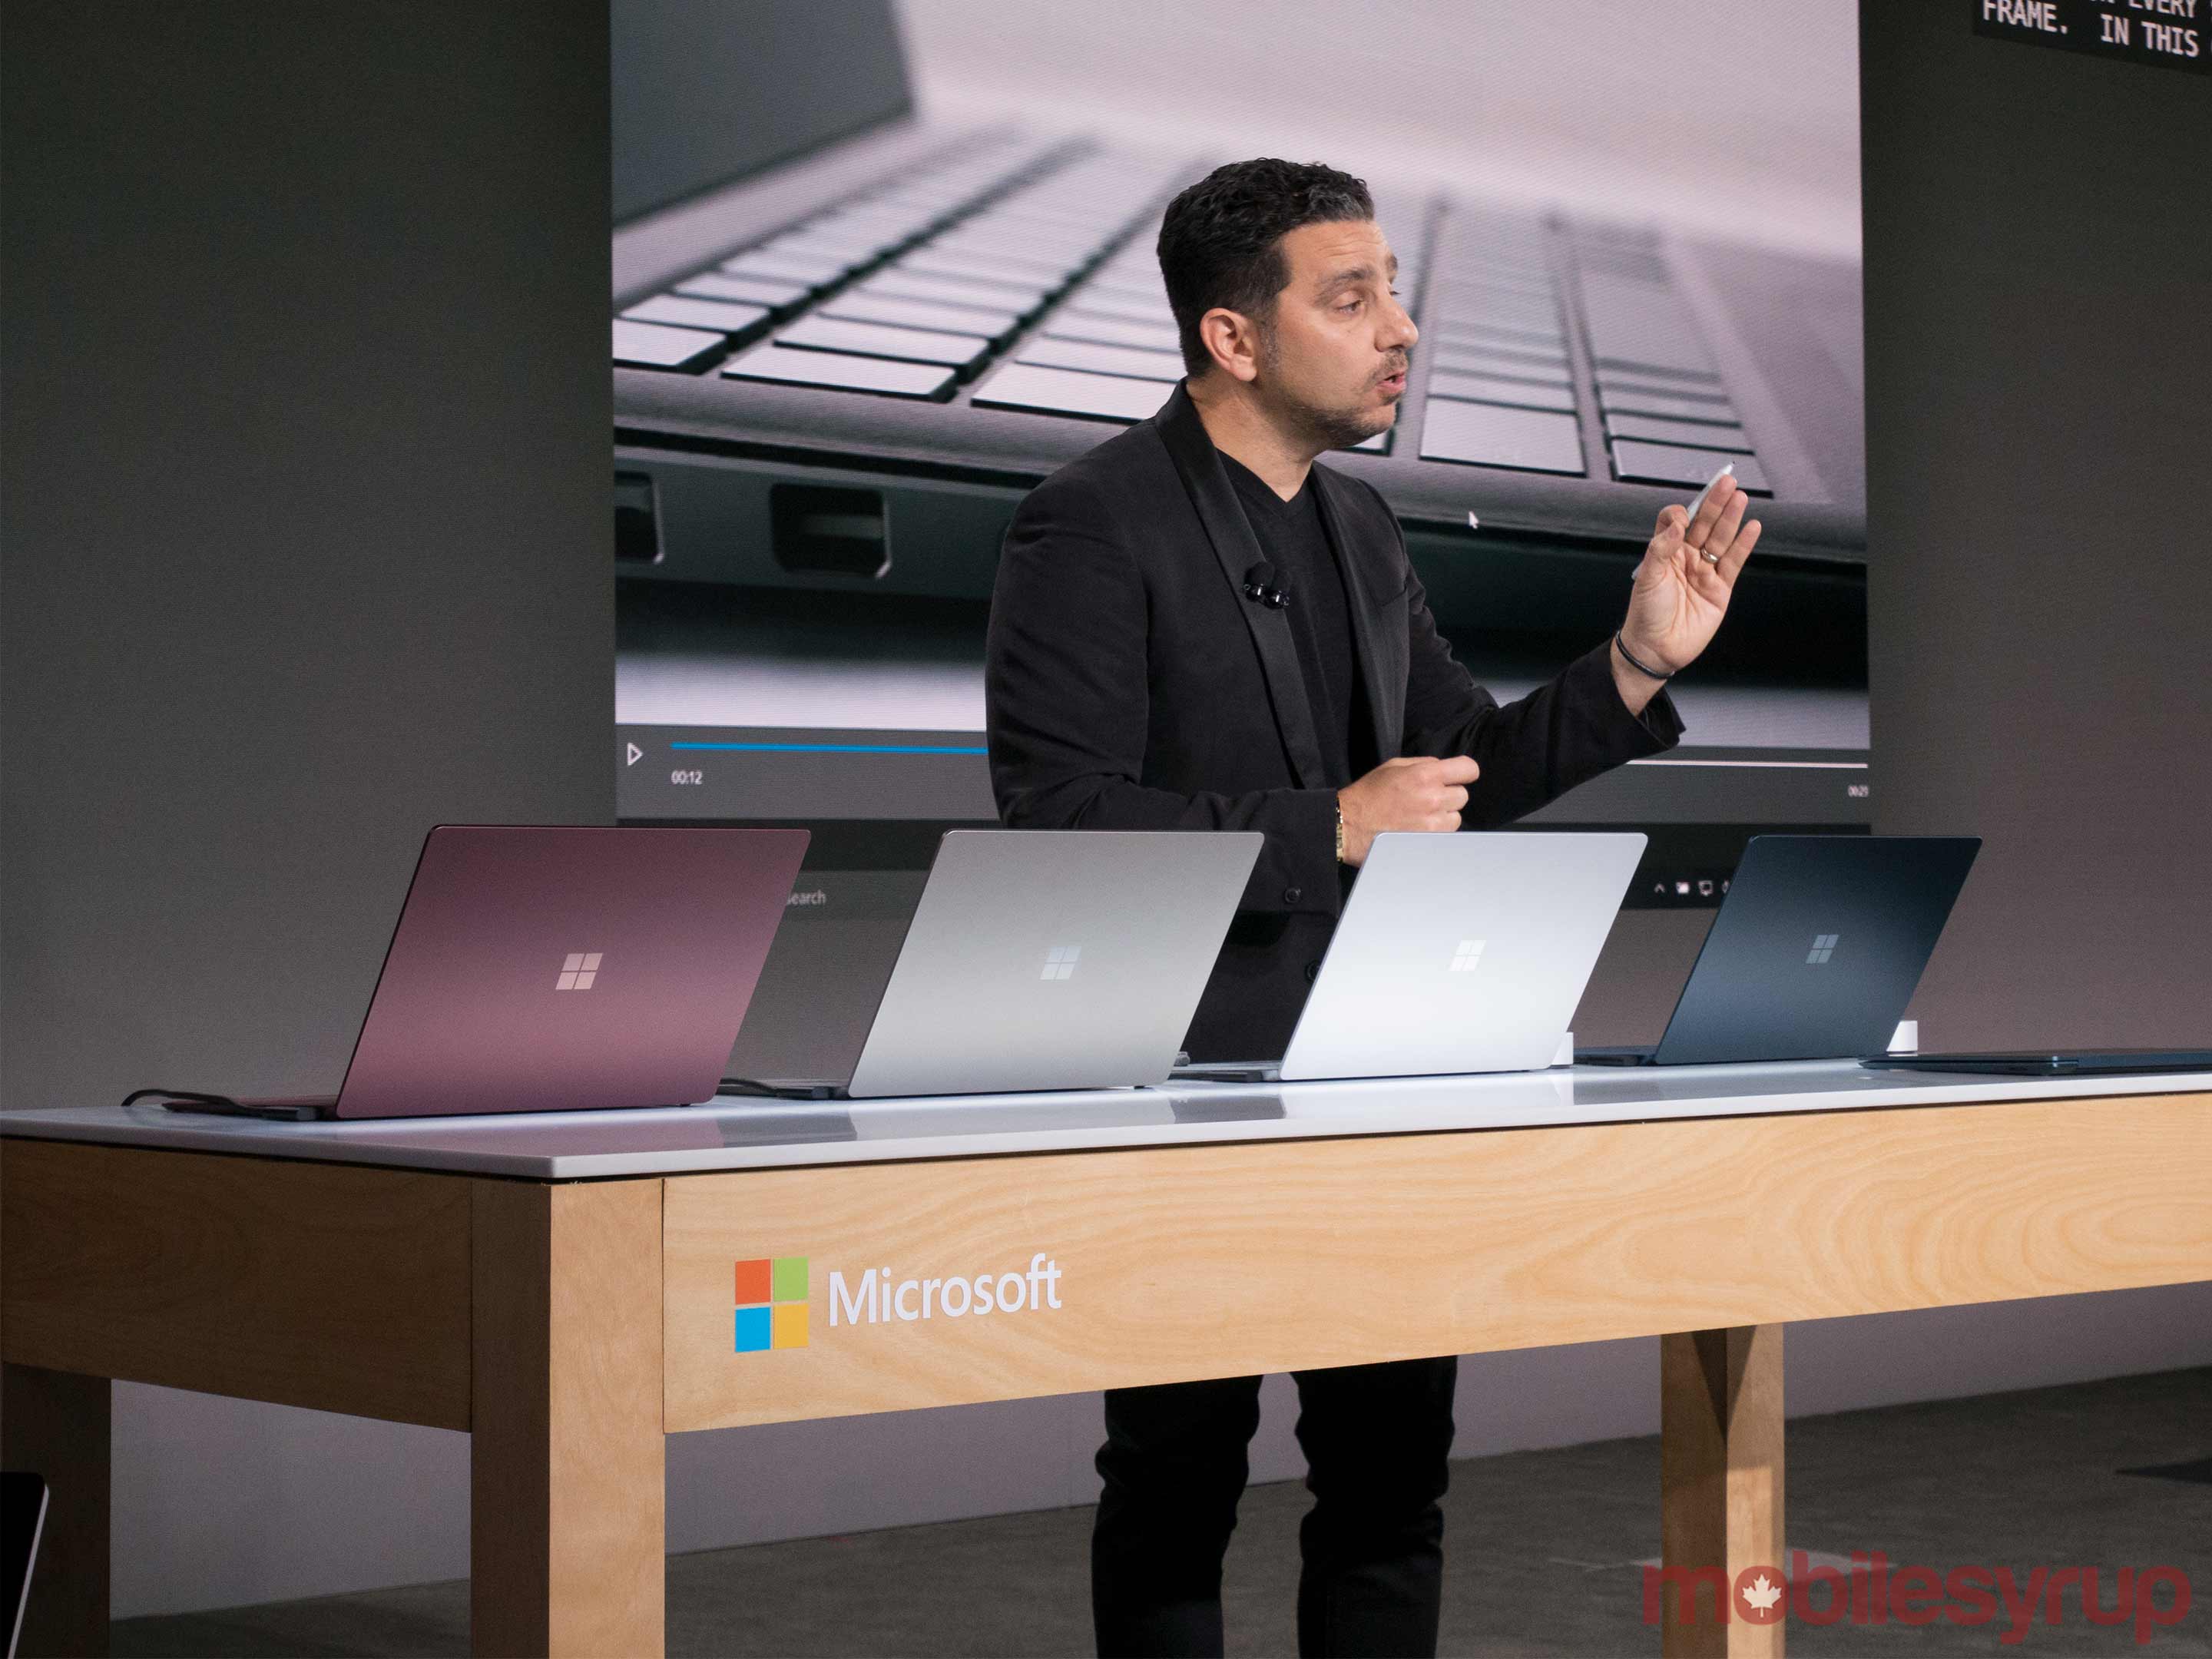 Microsoft unveiled the Surface Laptop with Windows 10 S